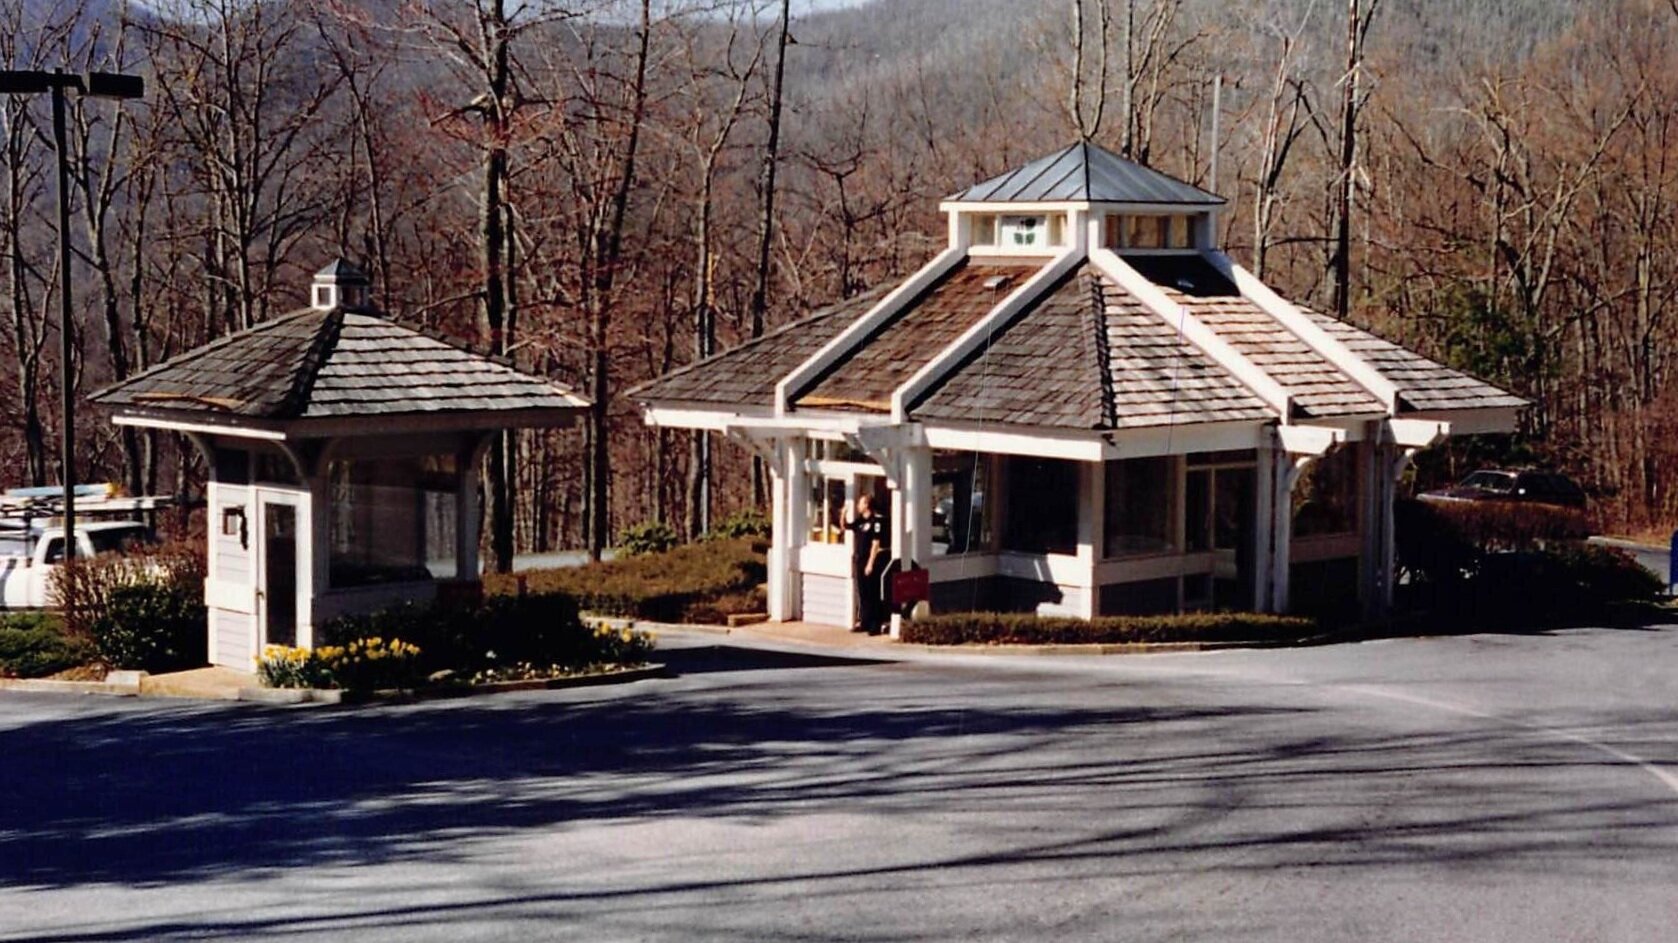 The Gatehouse & Communications Center in the 1990s